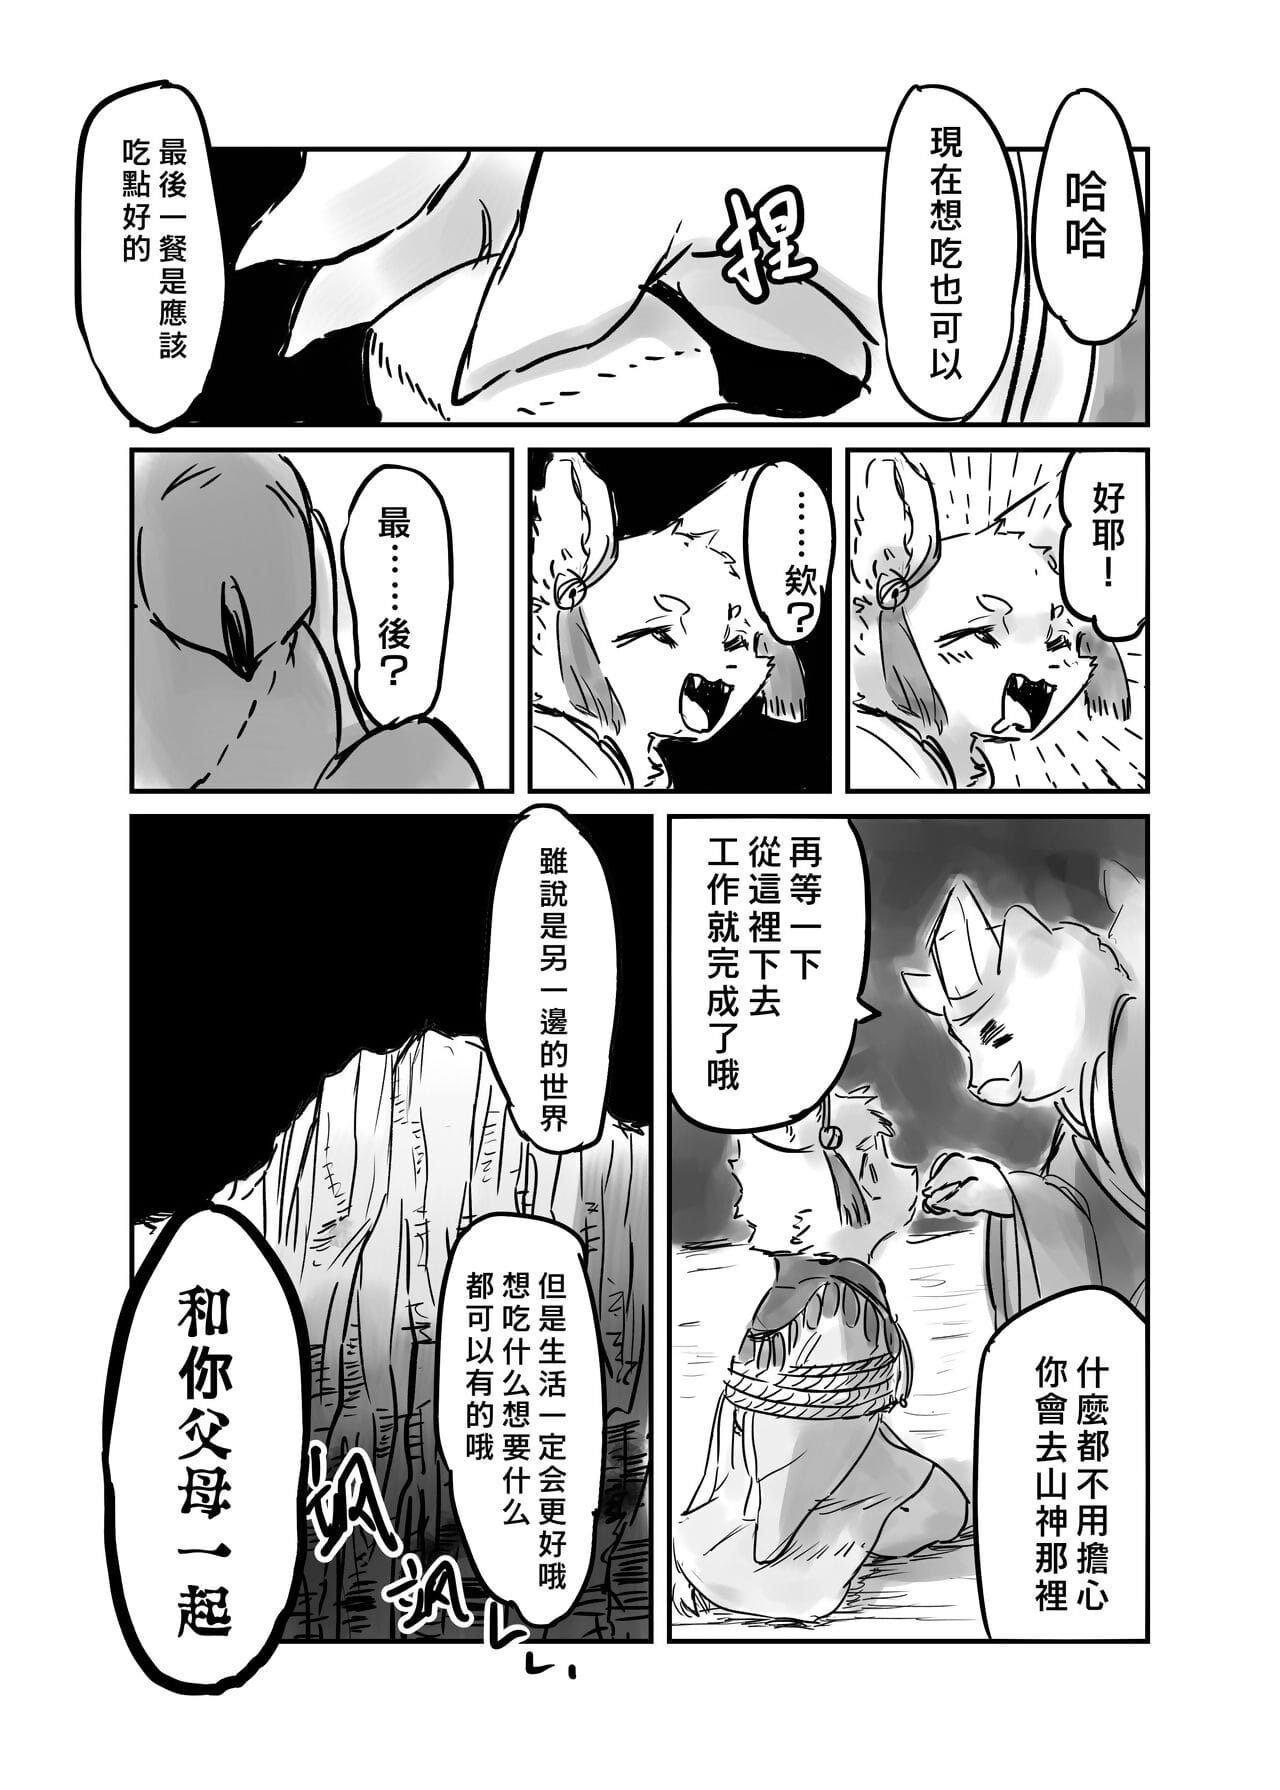 （the زائر 他乡之人 by：鬼流 جزء 3 page 1